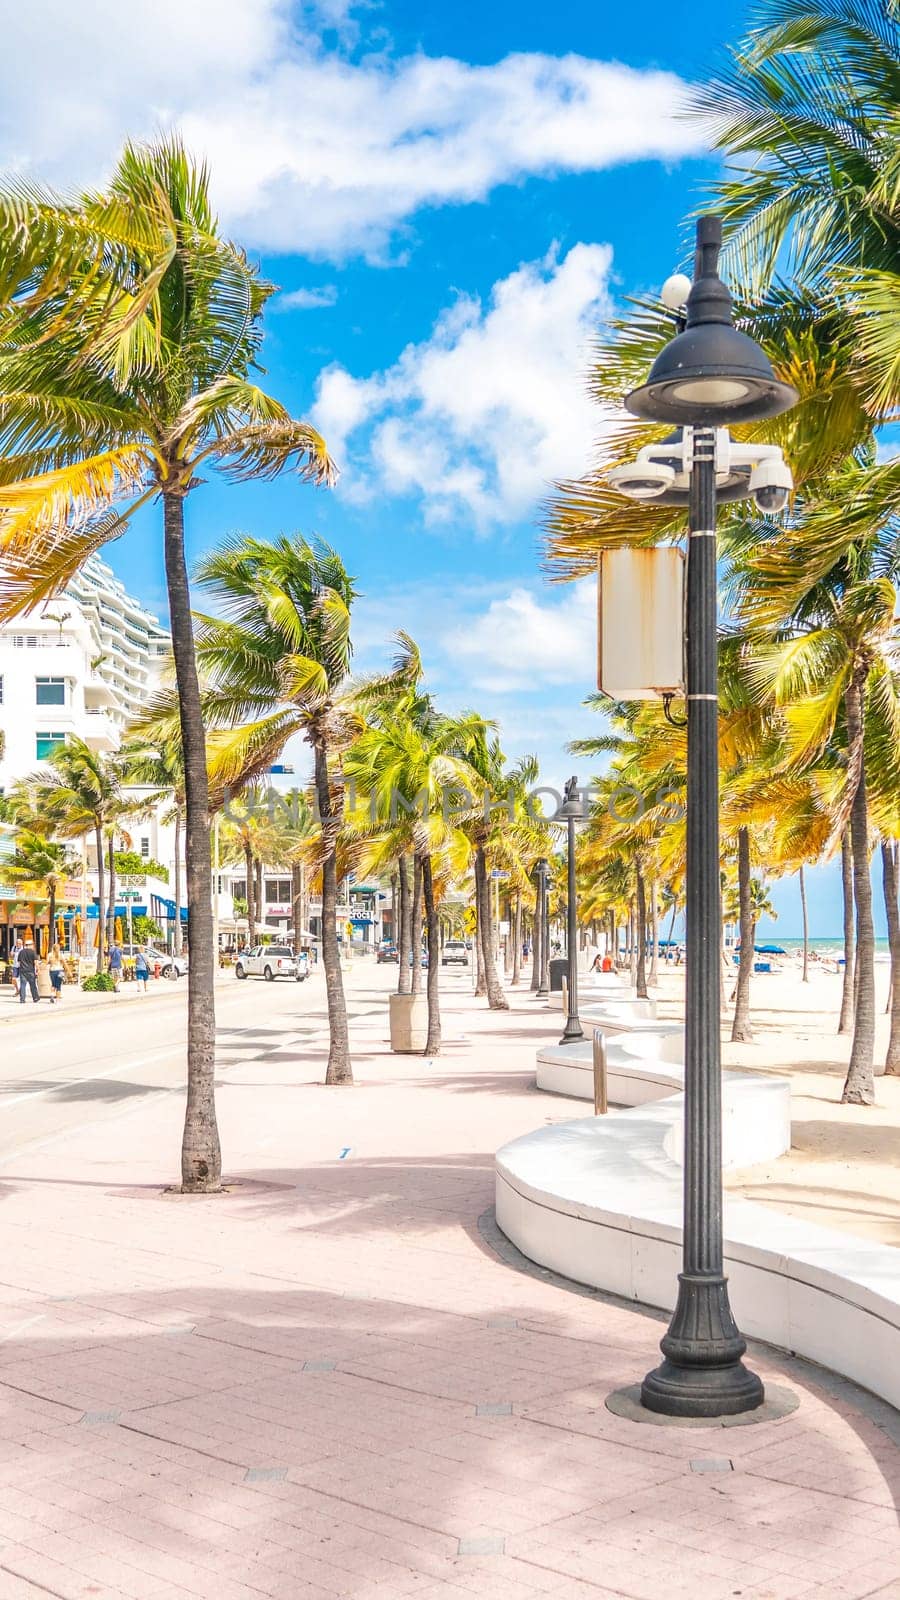 Seafront beach promenade with palm trees on a sunny day in Fort Lauderdale by Mariakray